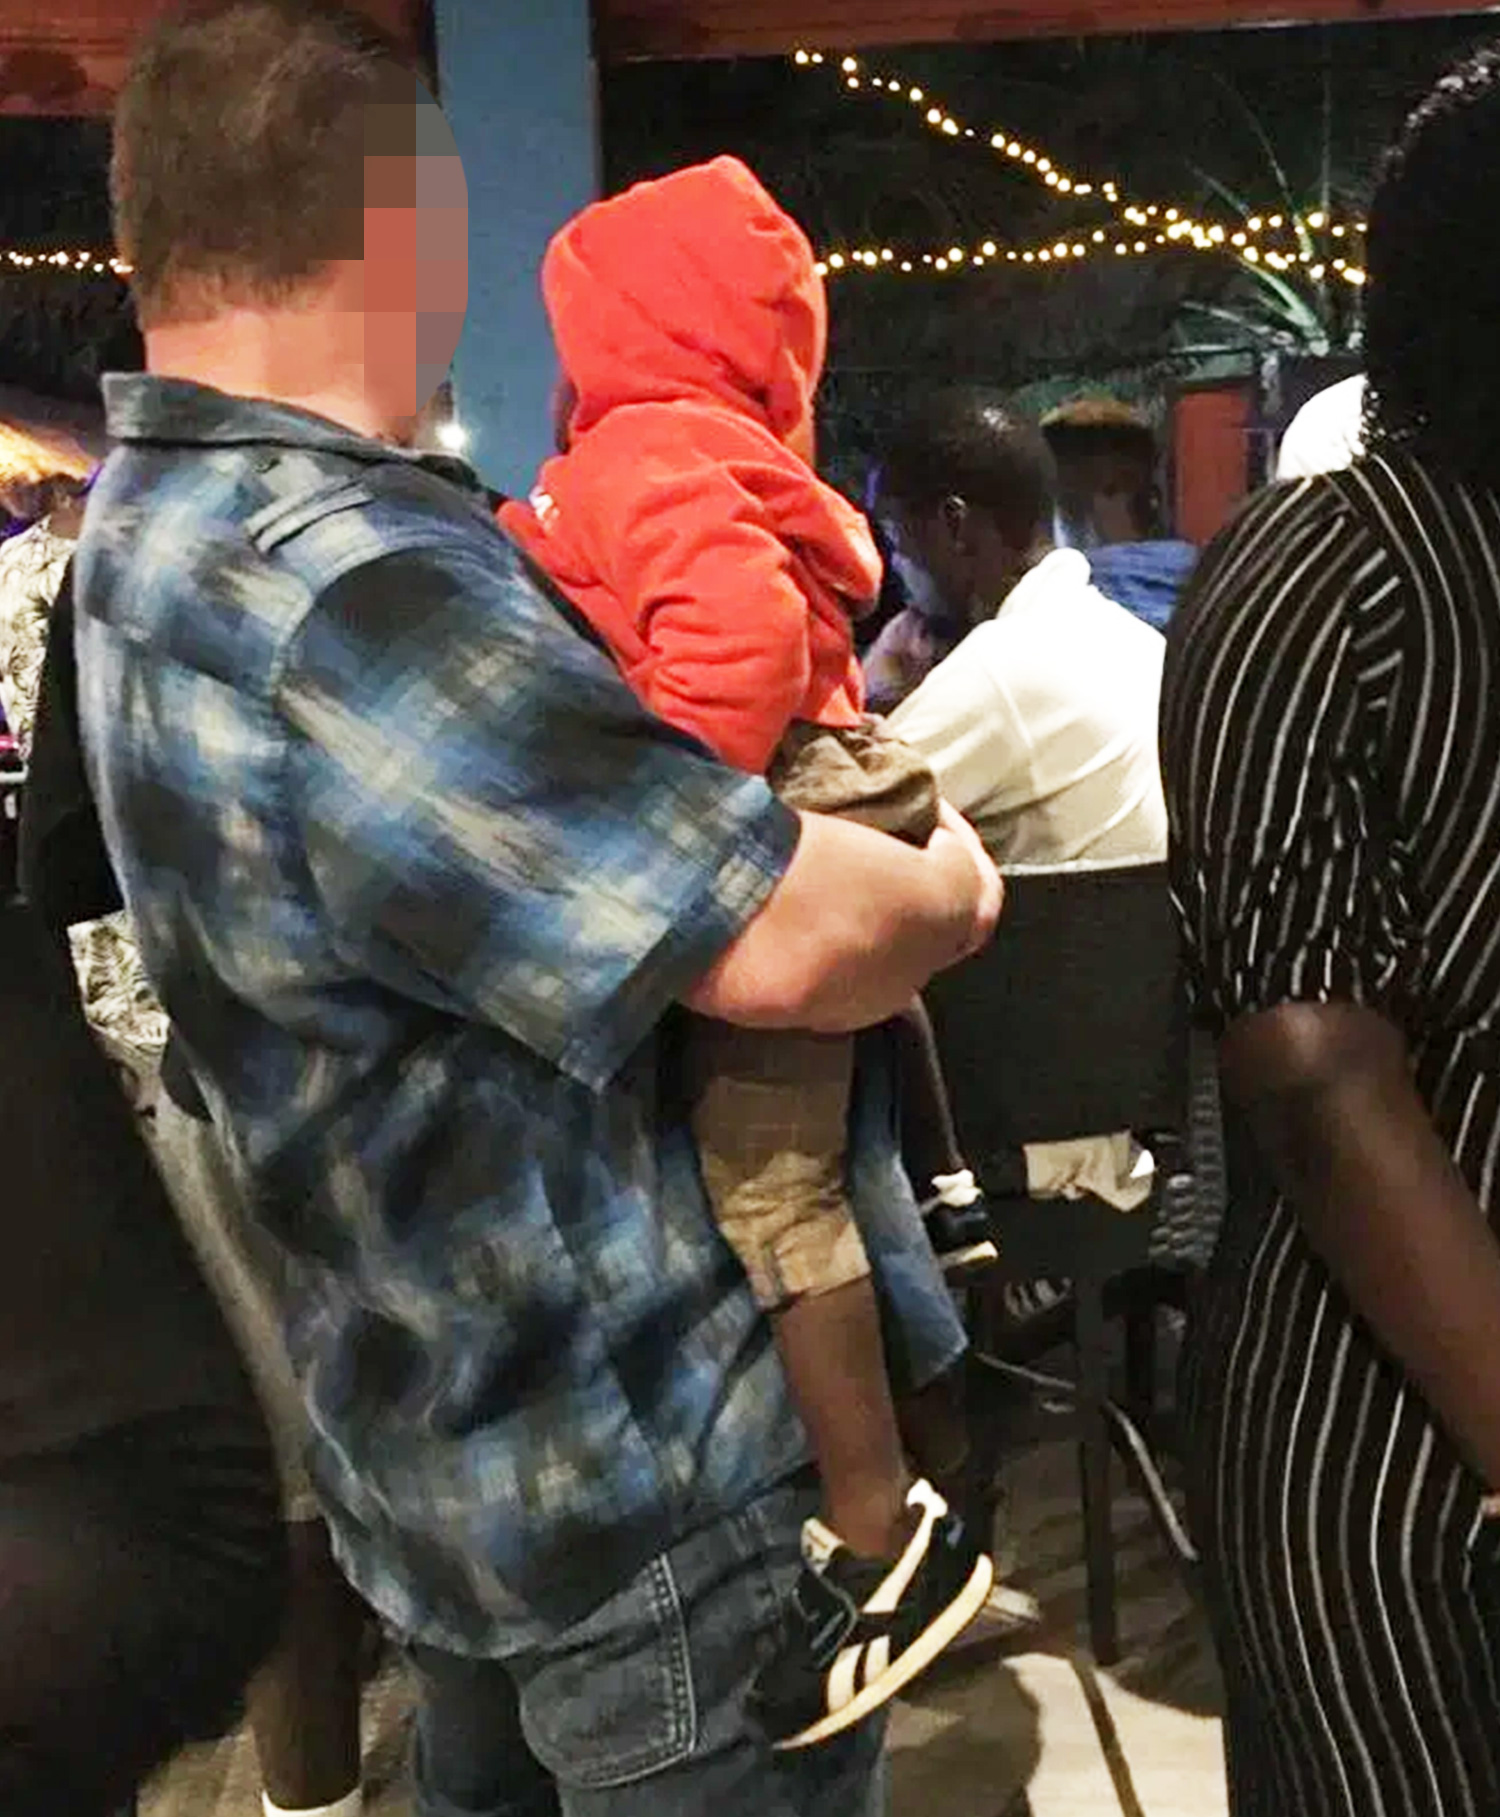  A man with a British accent holds a scared toddler in his arms